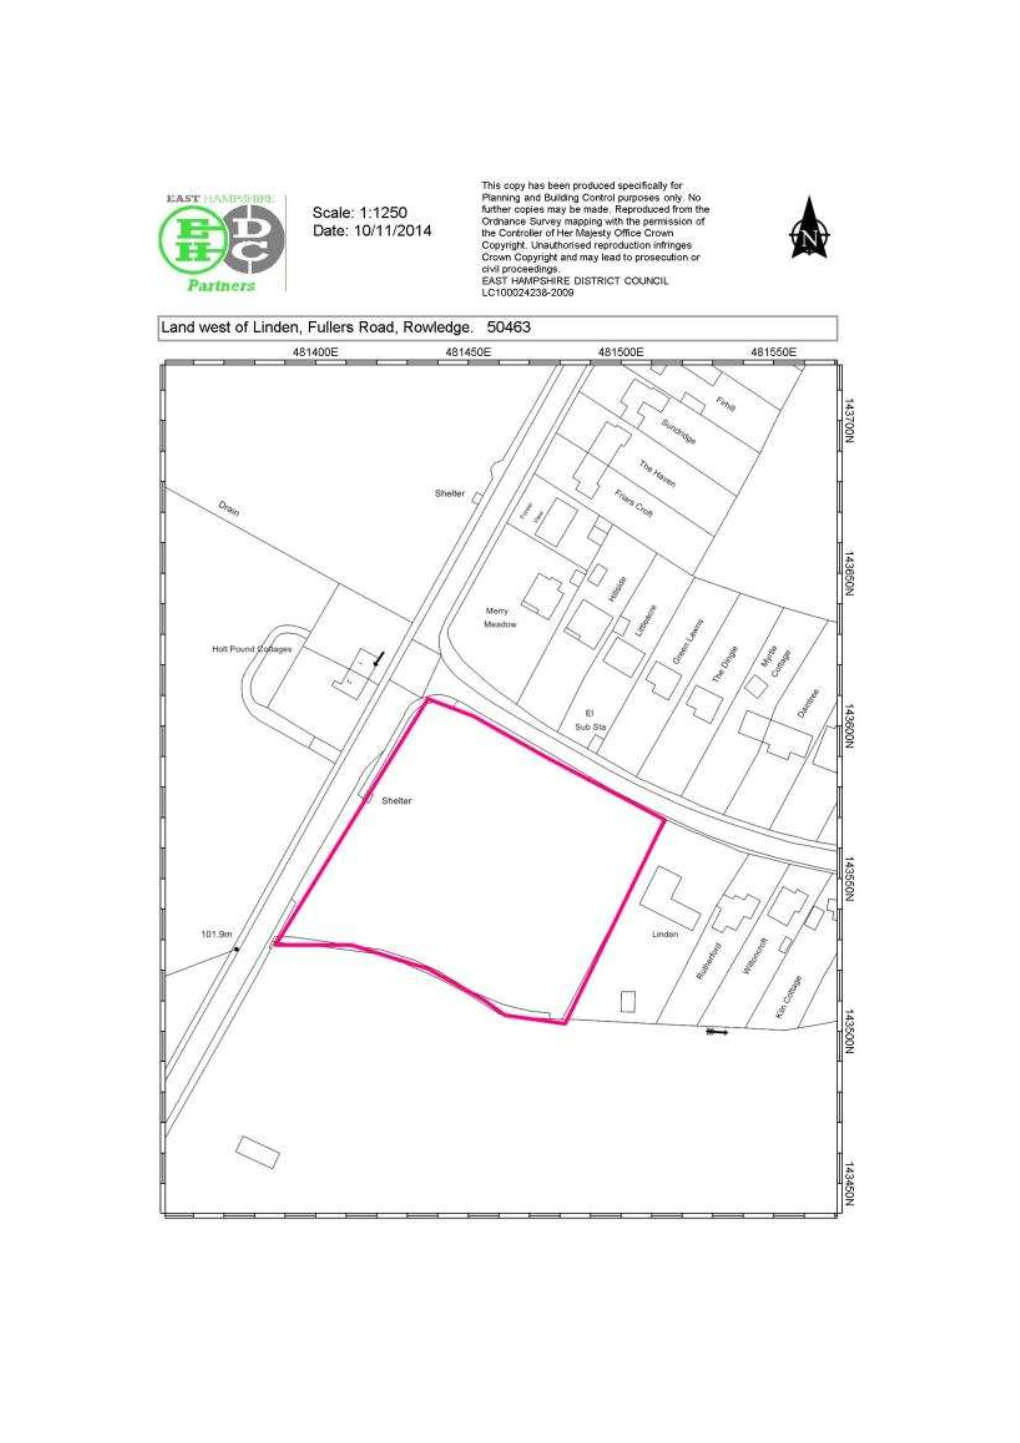 EHDC Part 1 Item 2 Land West of Linden Fullers Road Rowledge.Pdf